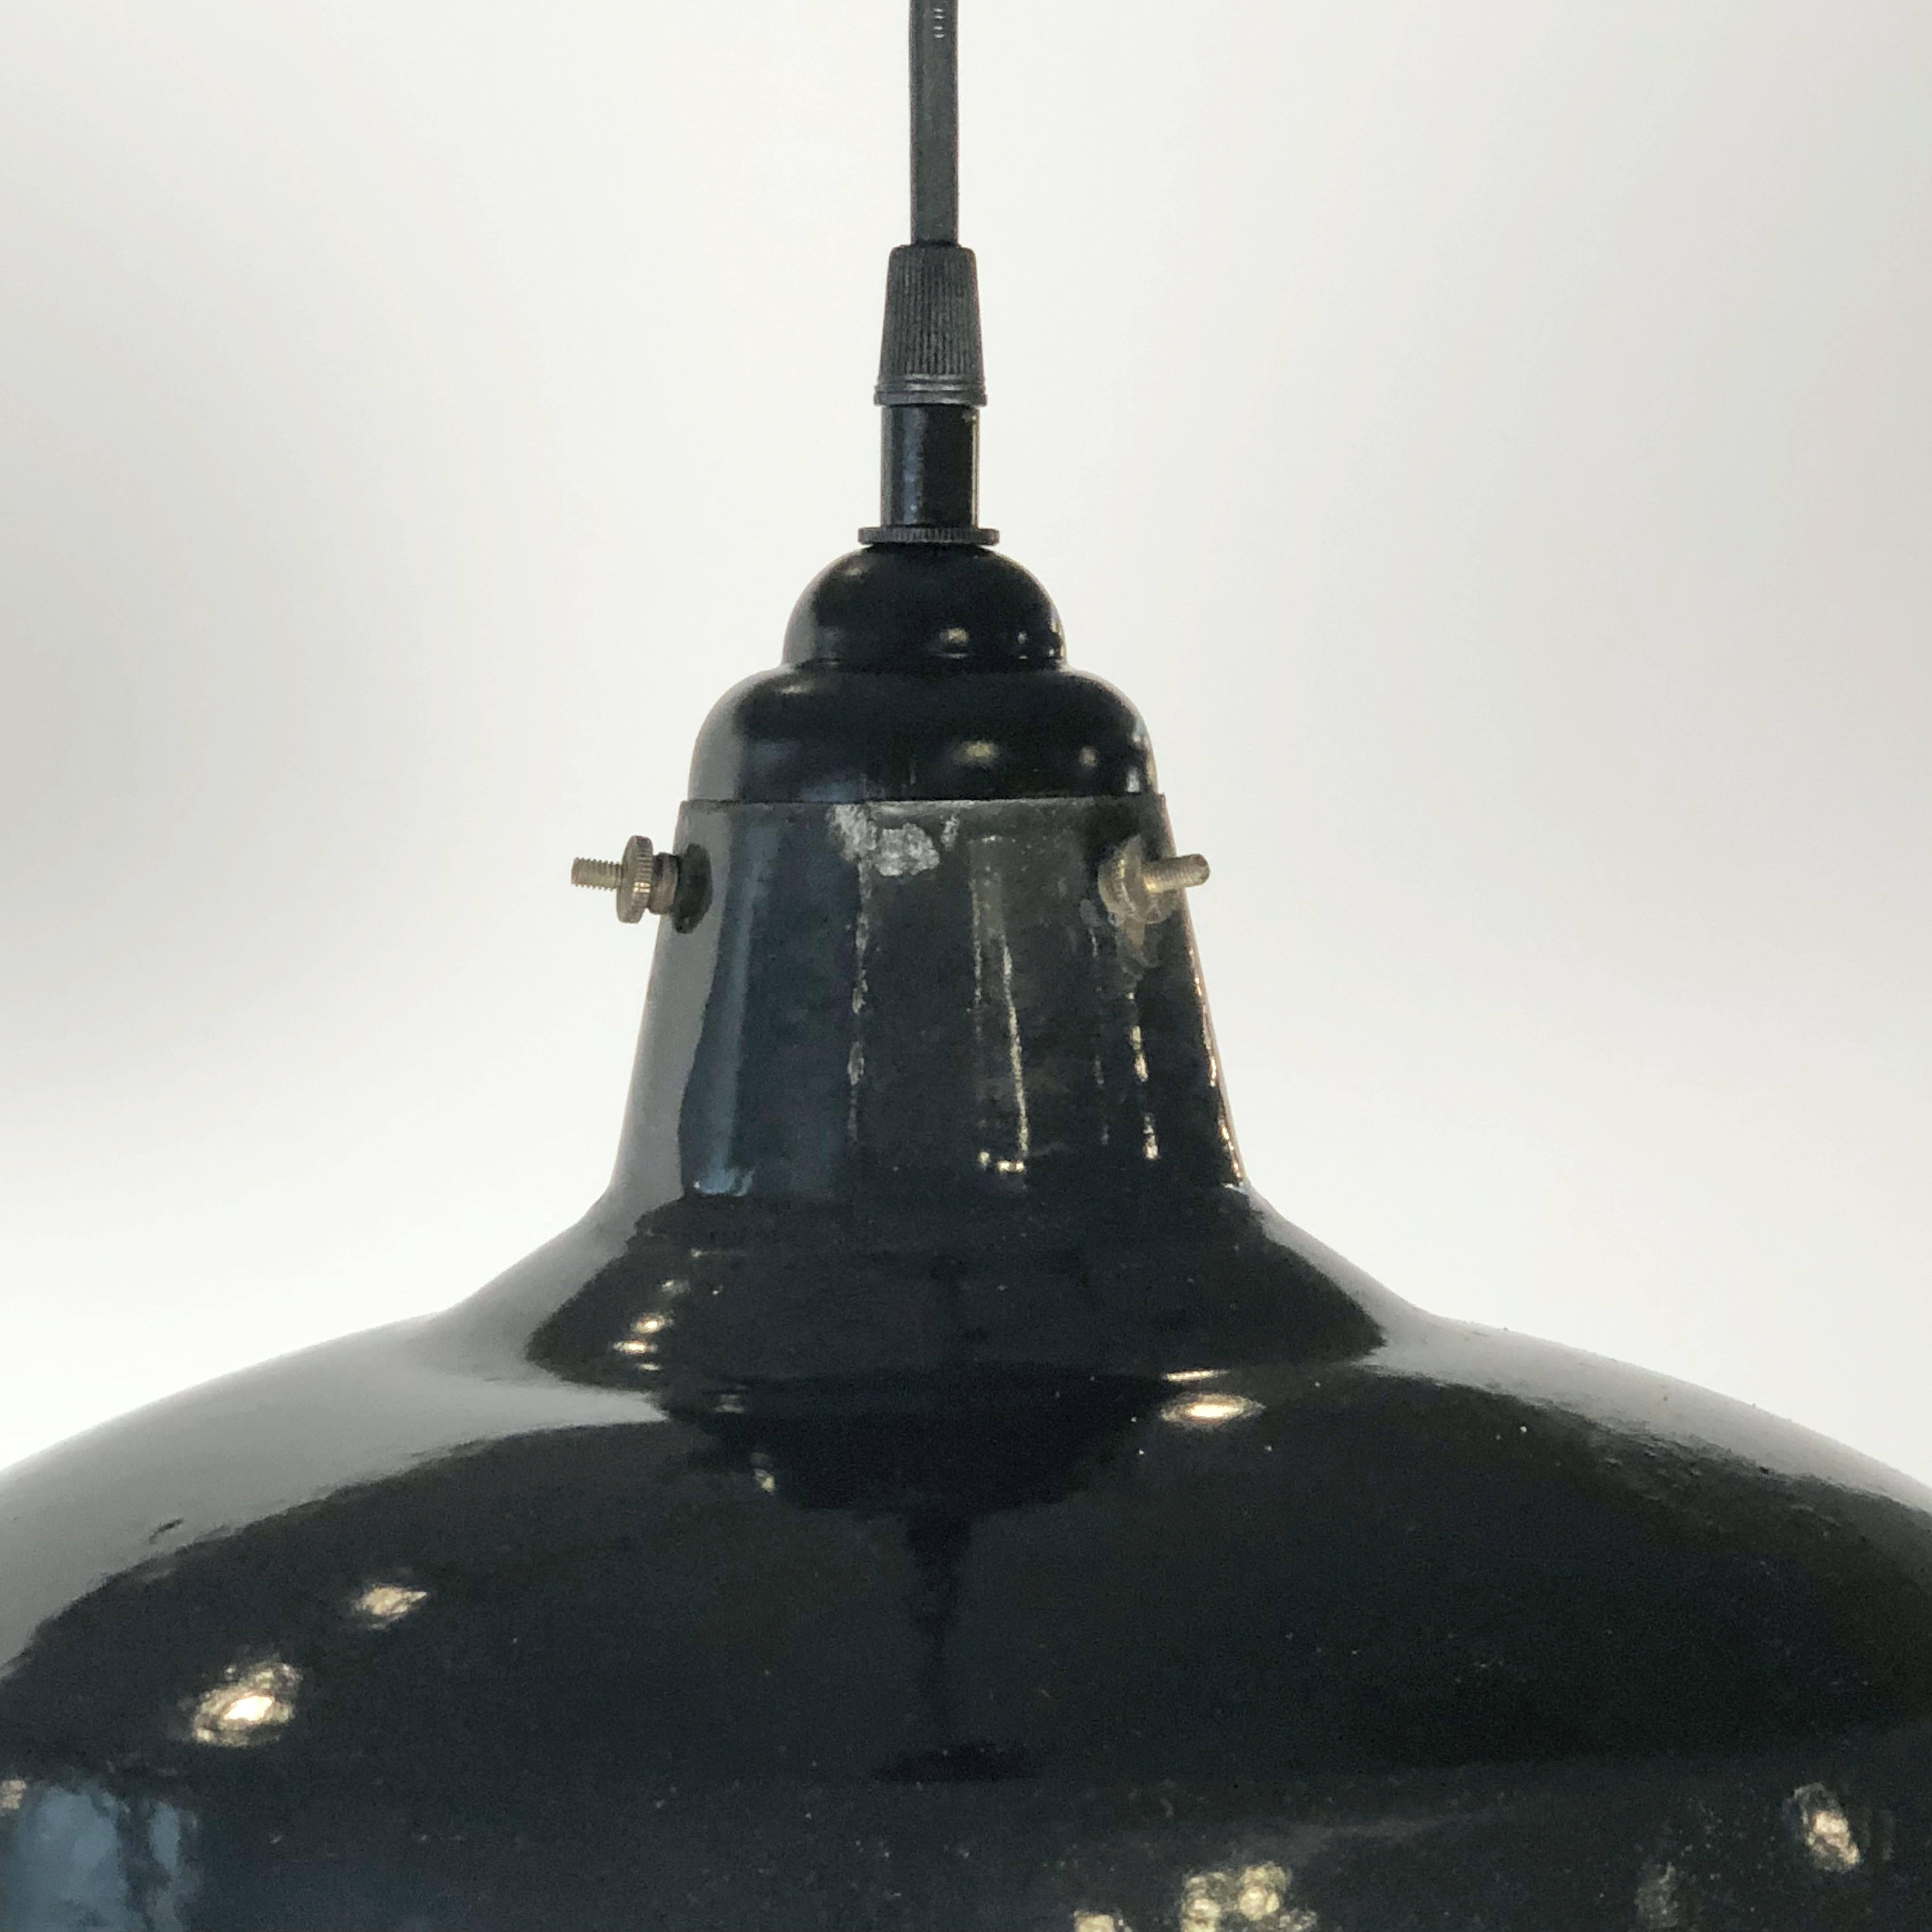 Black Tole Industrial Hanging Lamps or Lanterns from England (14 1/4